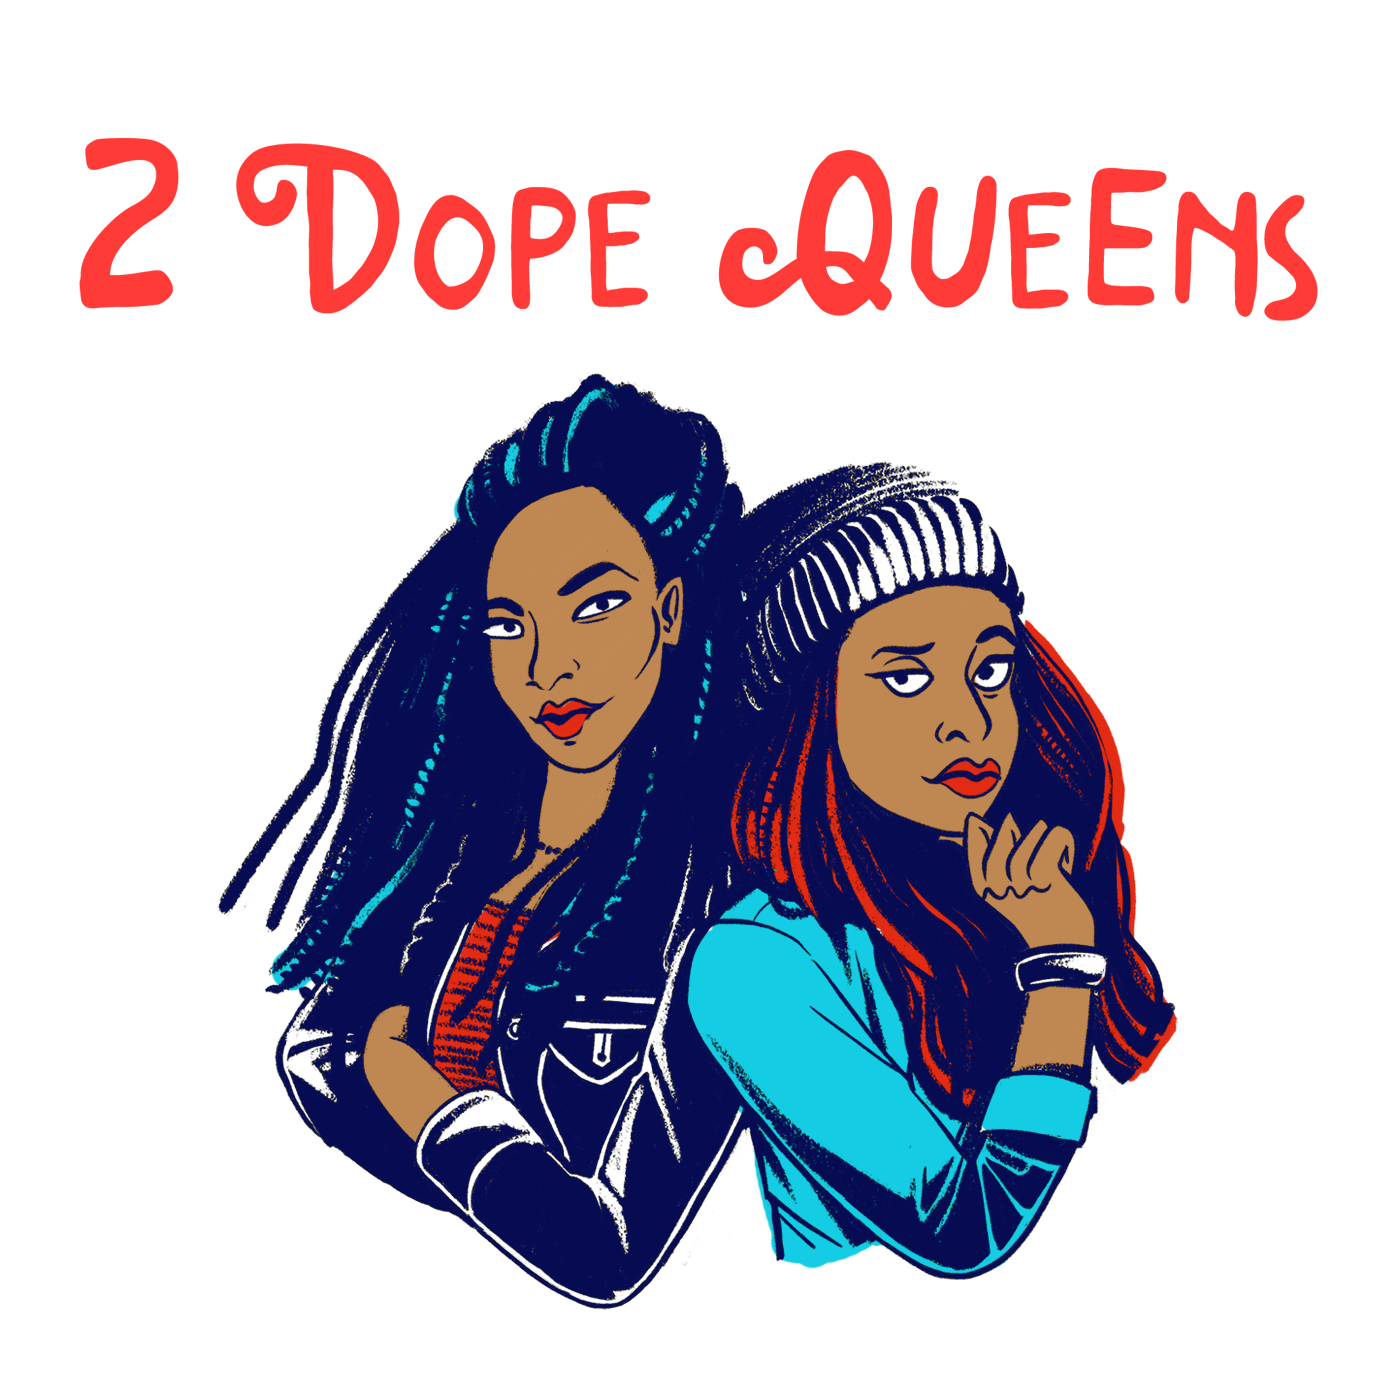 2 Dope Logo - 2 Dope Queens' to HBO: Hit Podcast to Become TV Series in 2018 ...